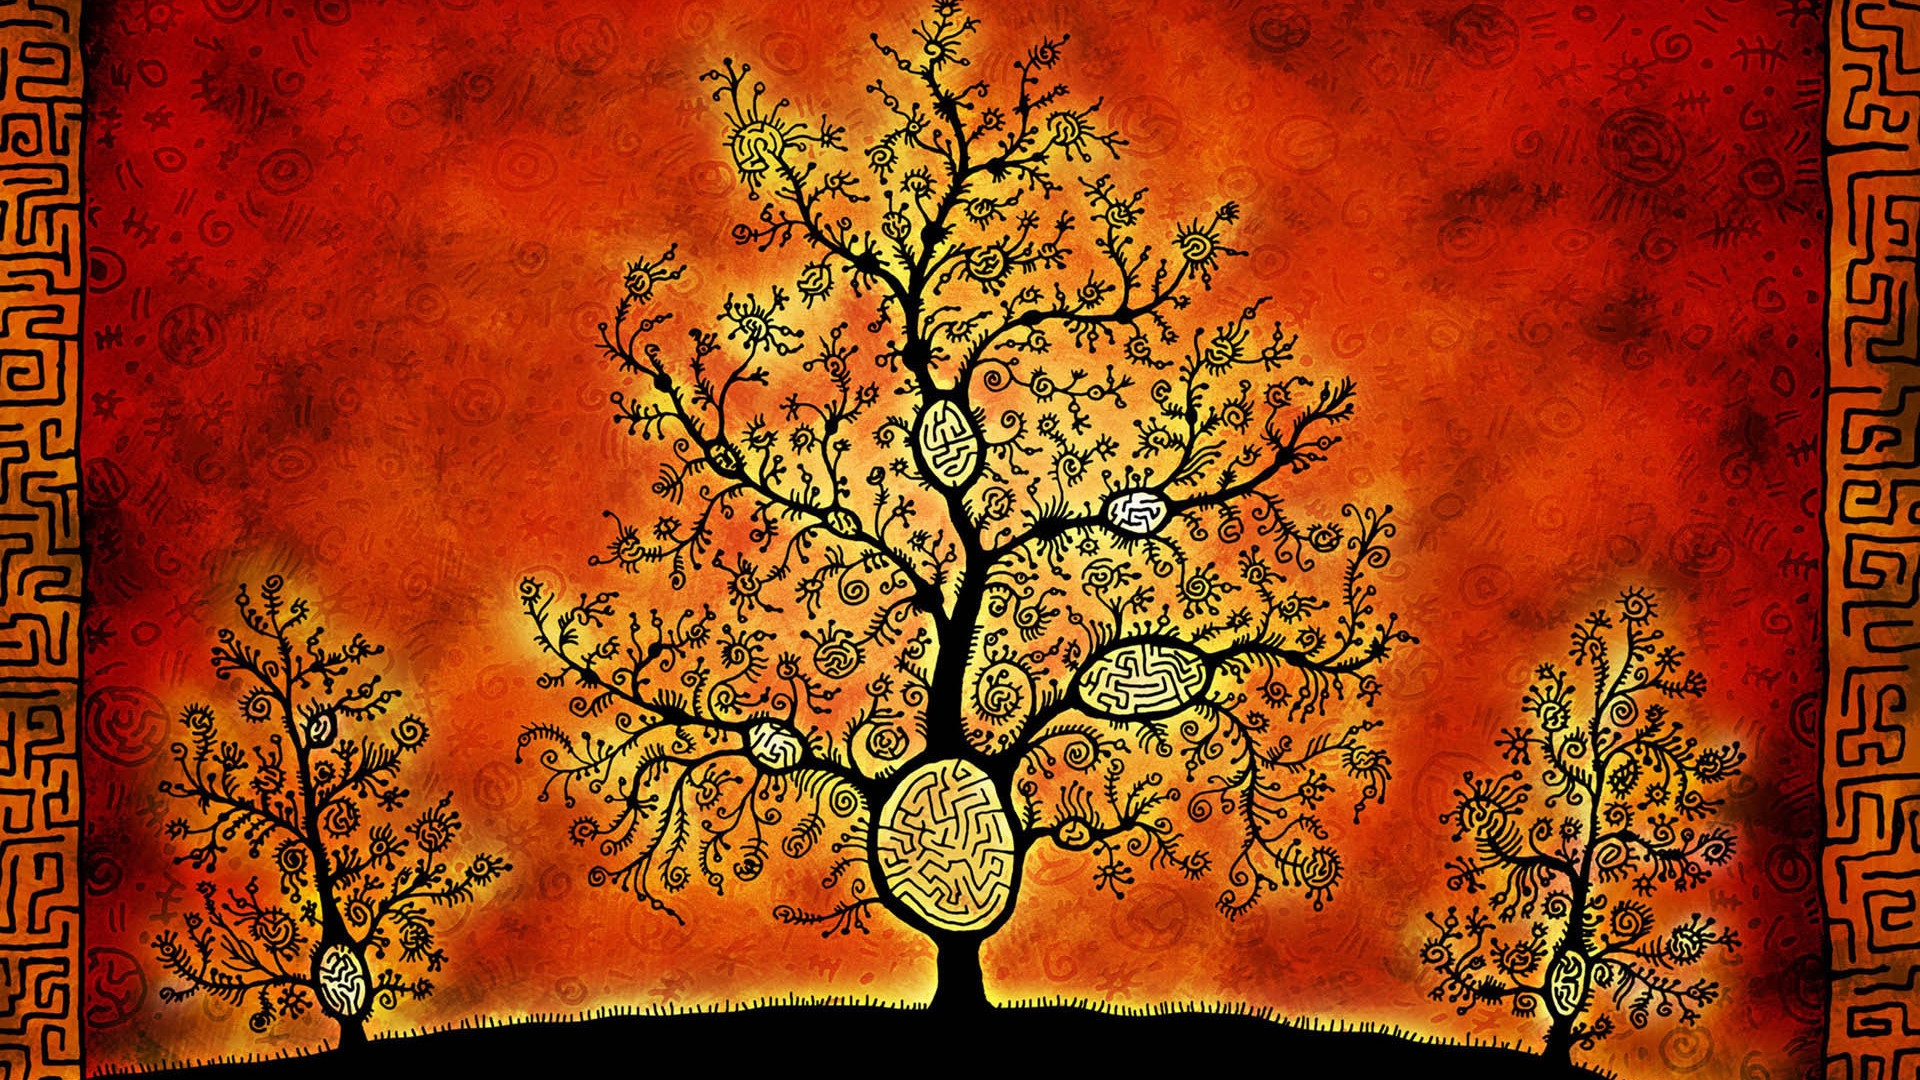 Fantasy Tree Drawing for 1920 x 1080 HDTV 1080p resolution